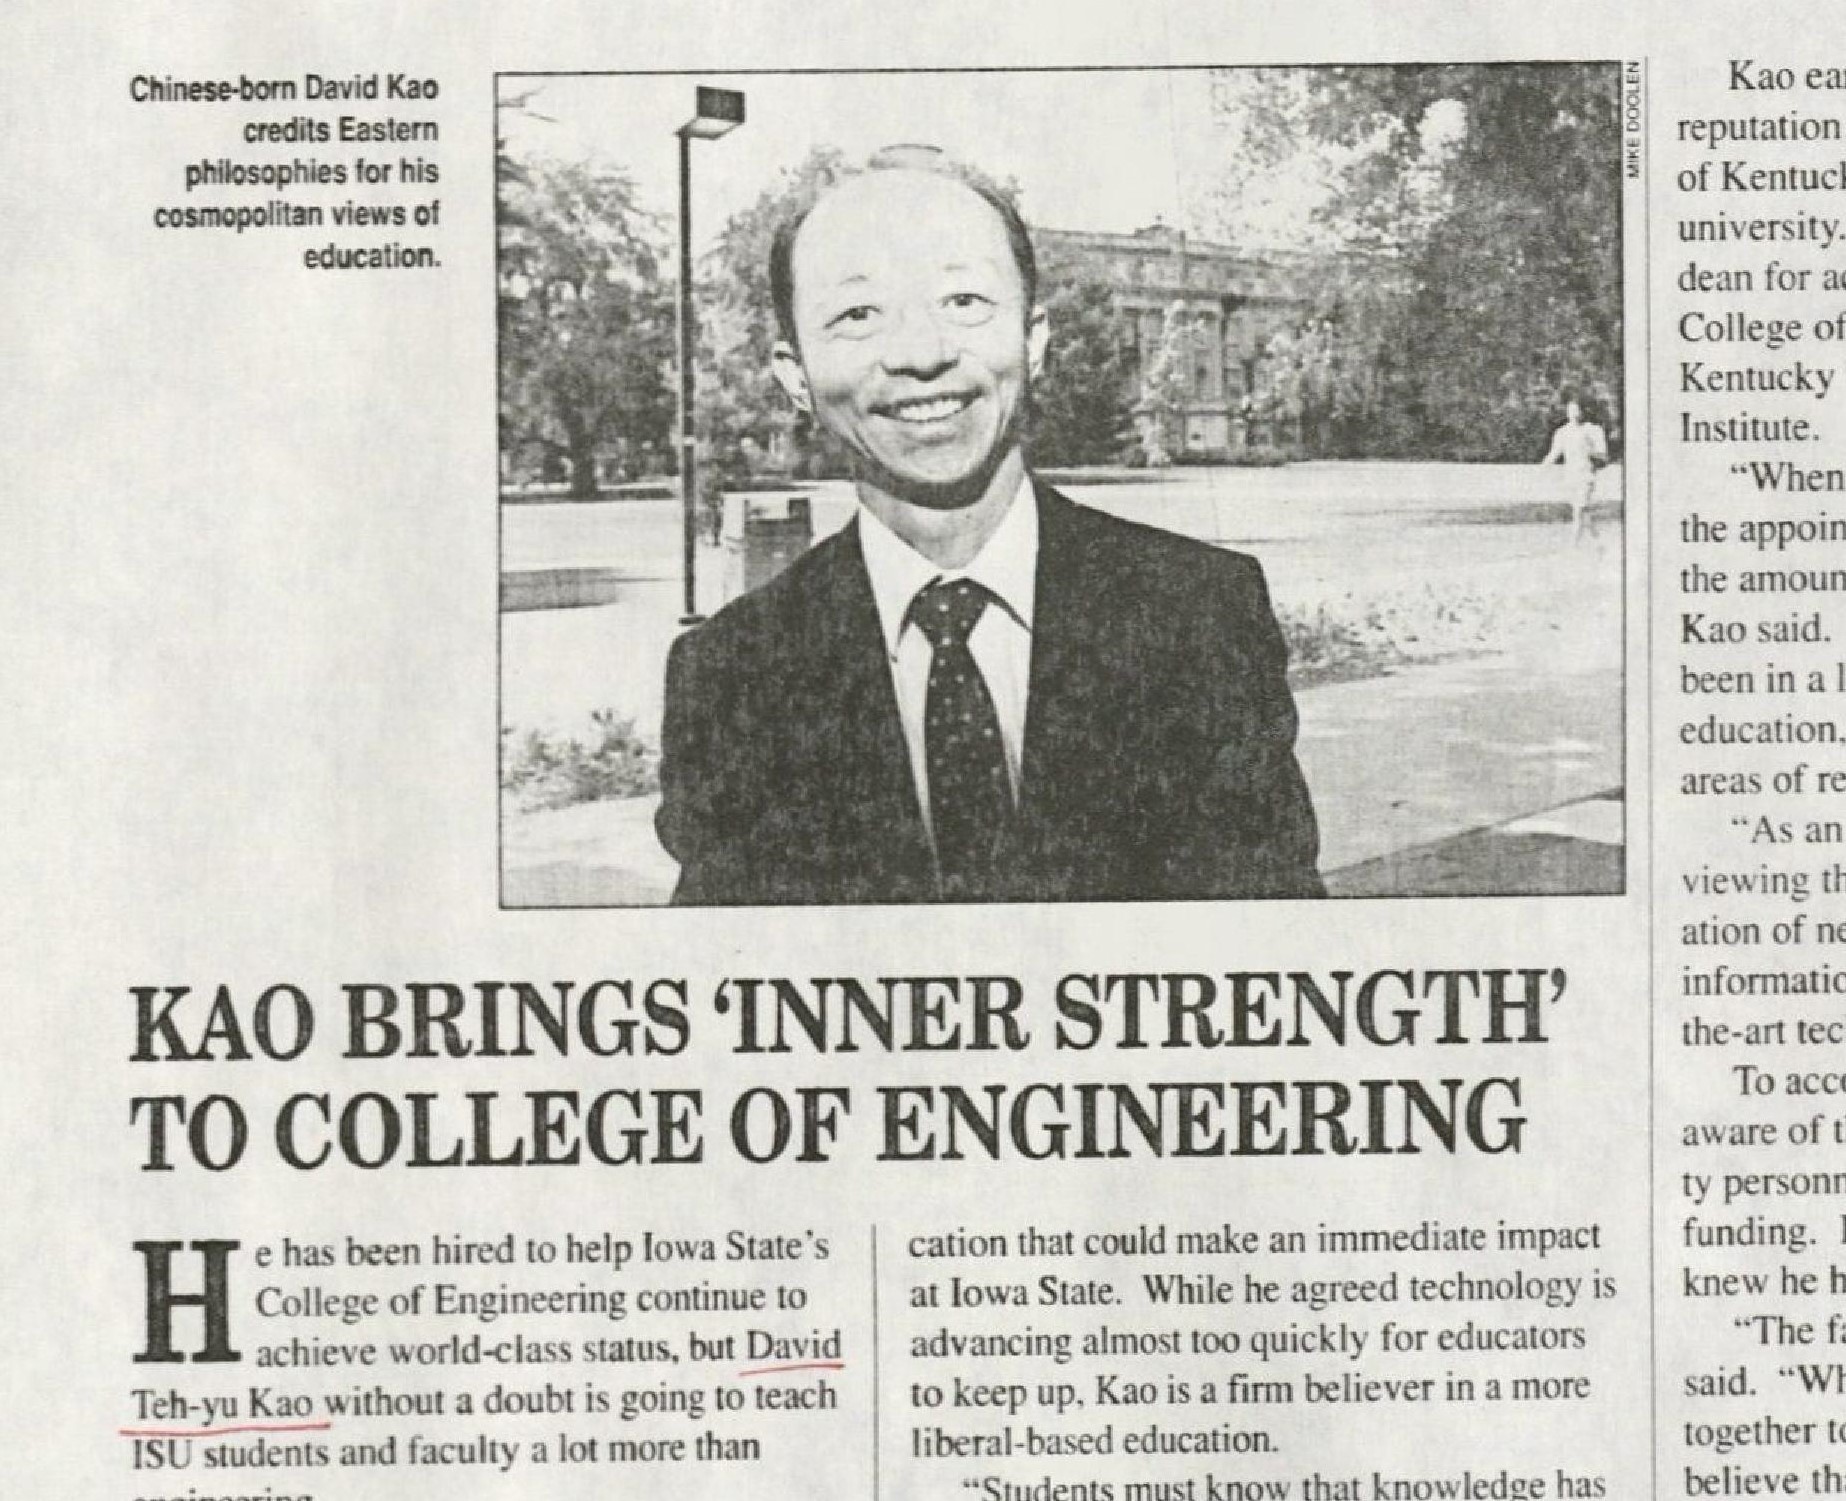 Article from Visions journal, published by the ISU Alumni Association. Undated. RS 11/1/16, Box 1, Folder 2. Title of the article reads as follows: "Kao Brings 'Inner Strength' To College of Engineering." Photo of Dean Kao. Caption on the photo reads as follows: "Chinese-born David Kao credits Eastern philosophies for his cosmopolitan views of education."